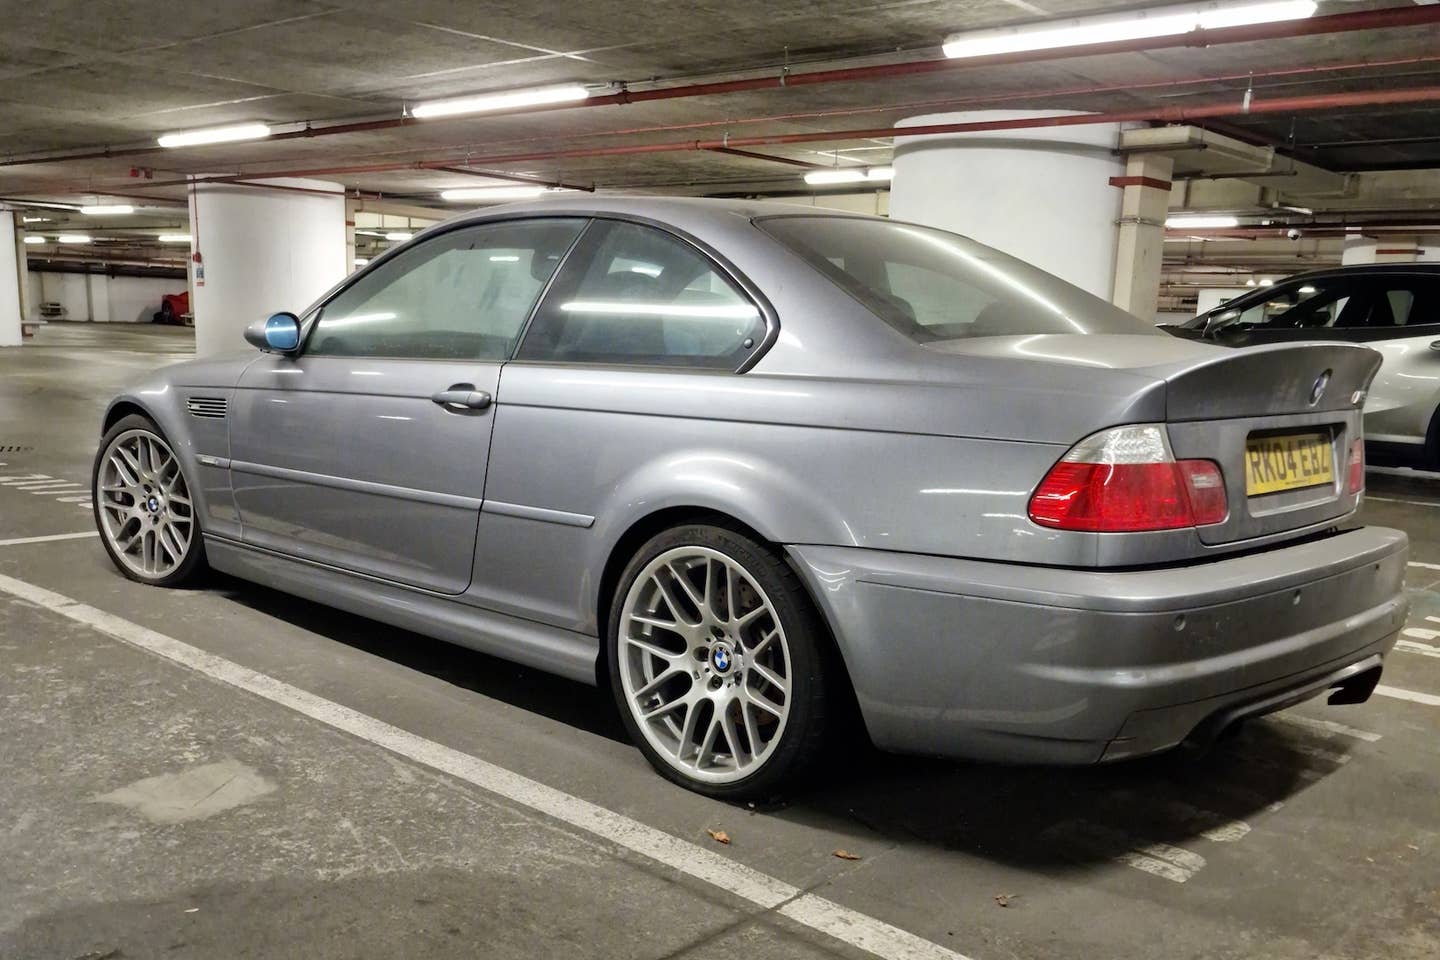 2004 BMW M3 CSL neglected in a London parking garage